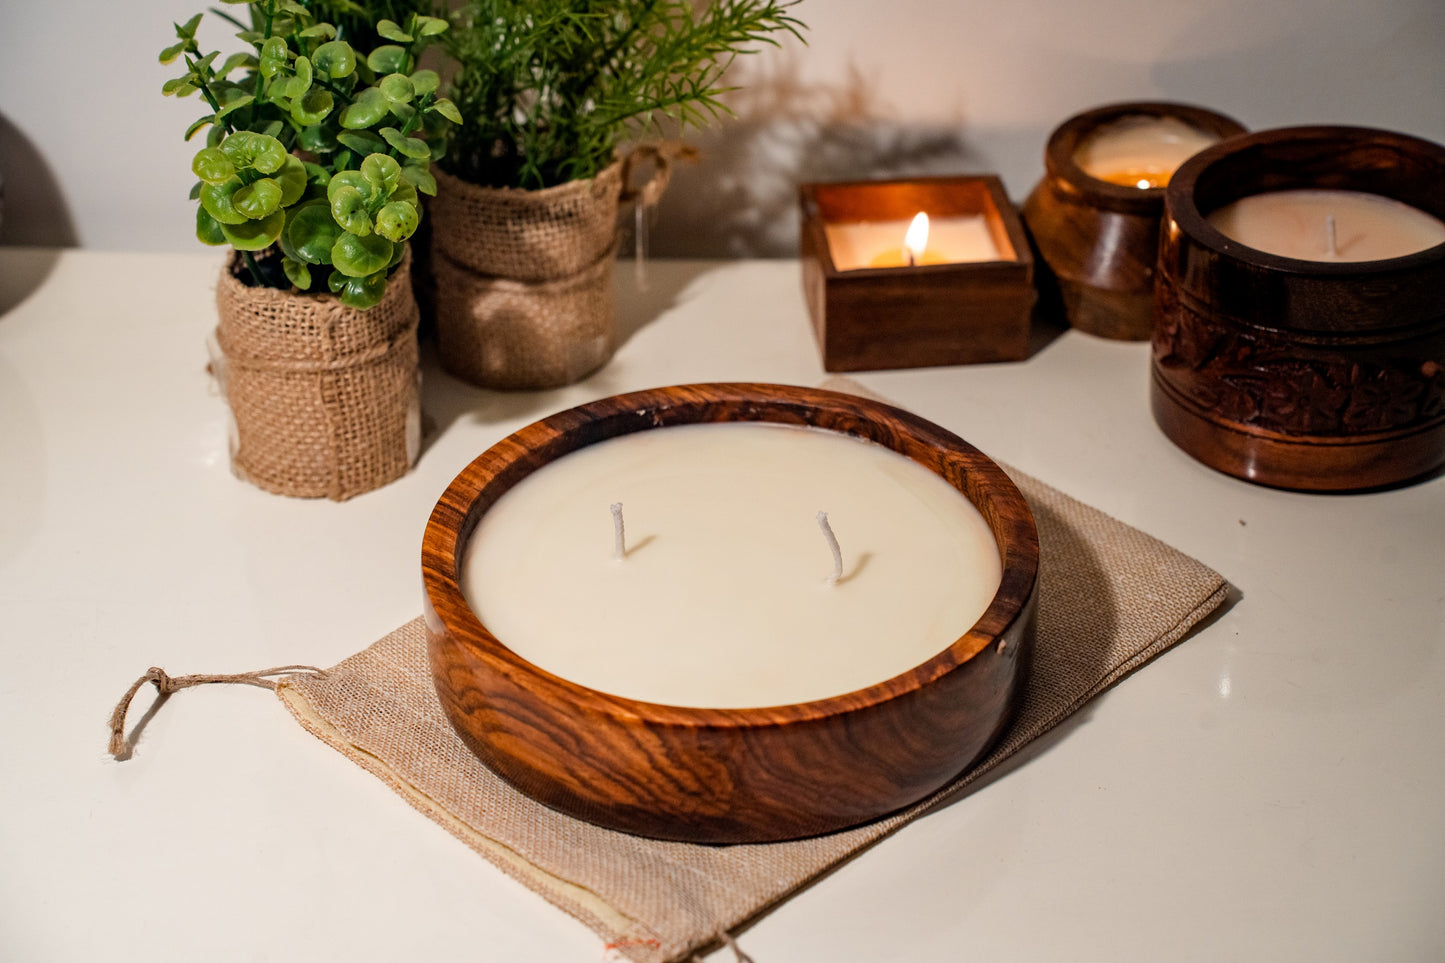 Two Wick Soy Wax Scented Candle in Wood - Flat Bowl Large - CrafiteriaCandles